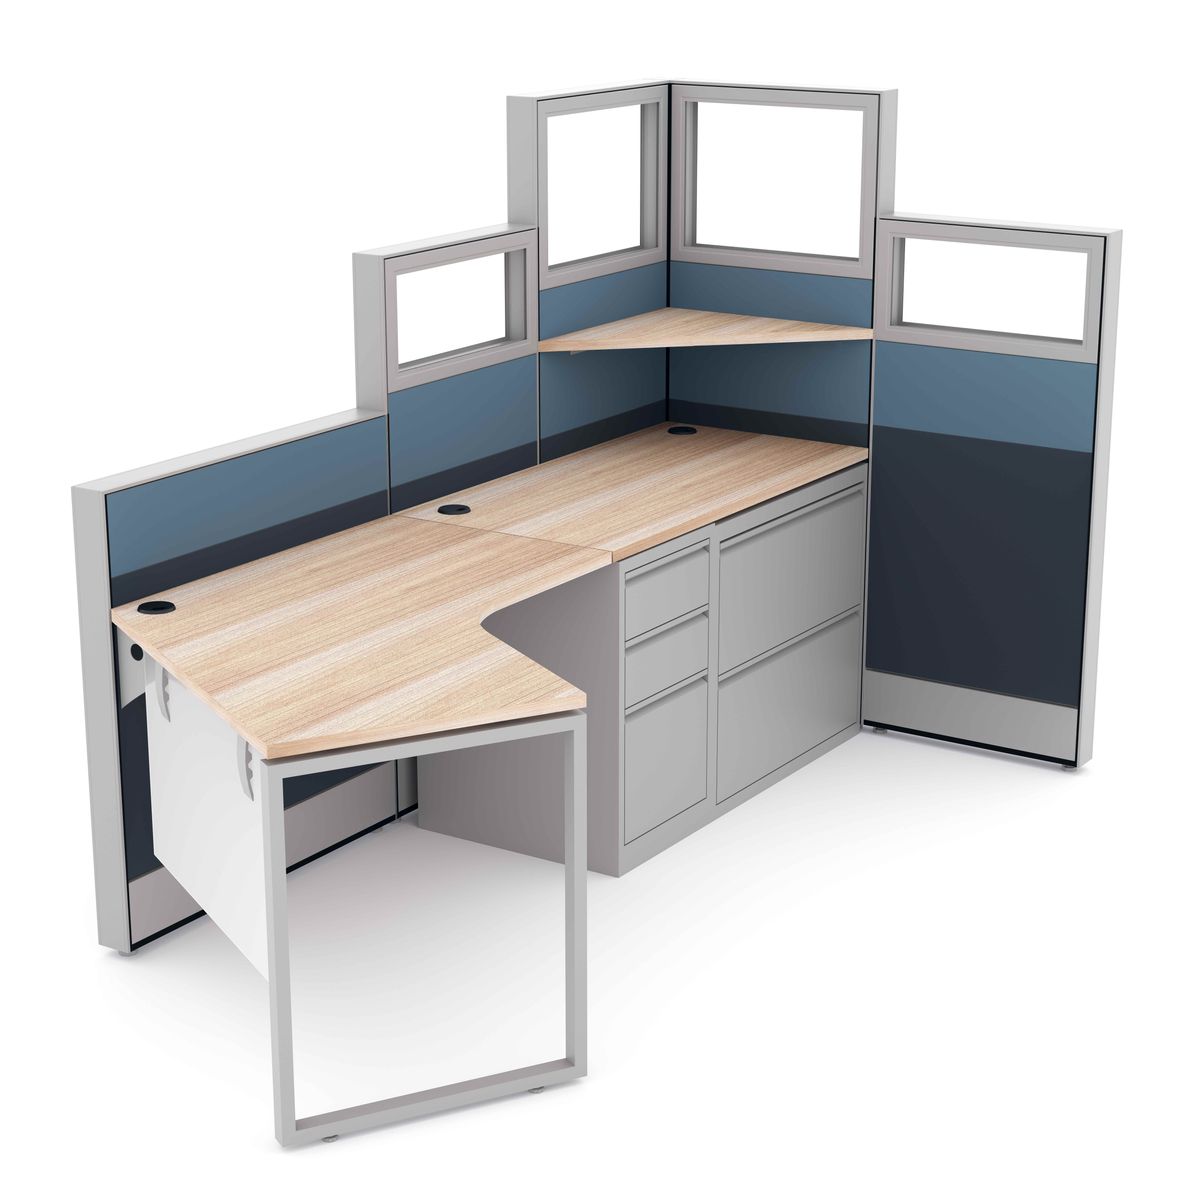 Render of 120 Degree Cubicle Workstation with File Cabinets